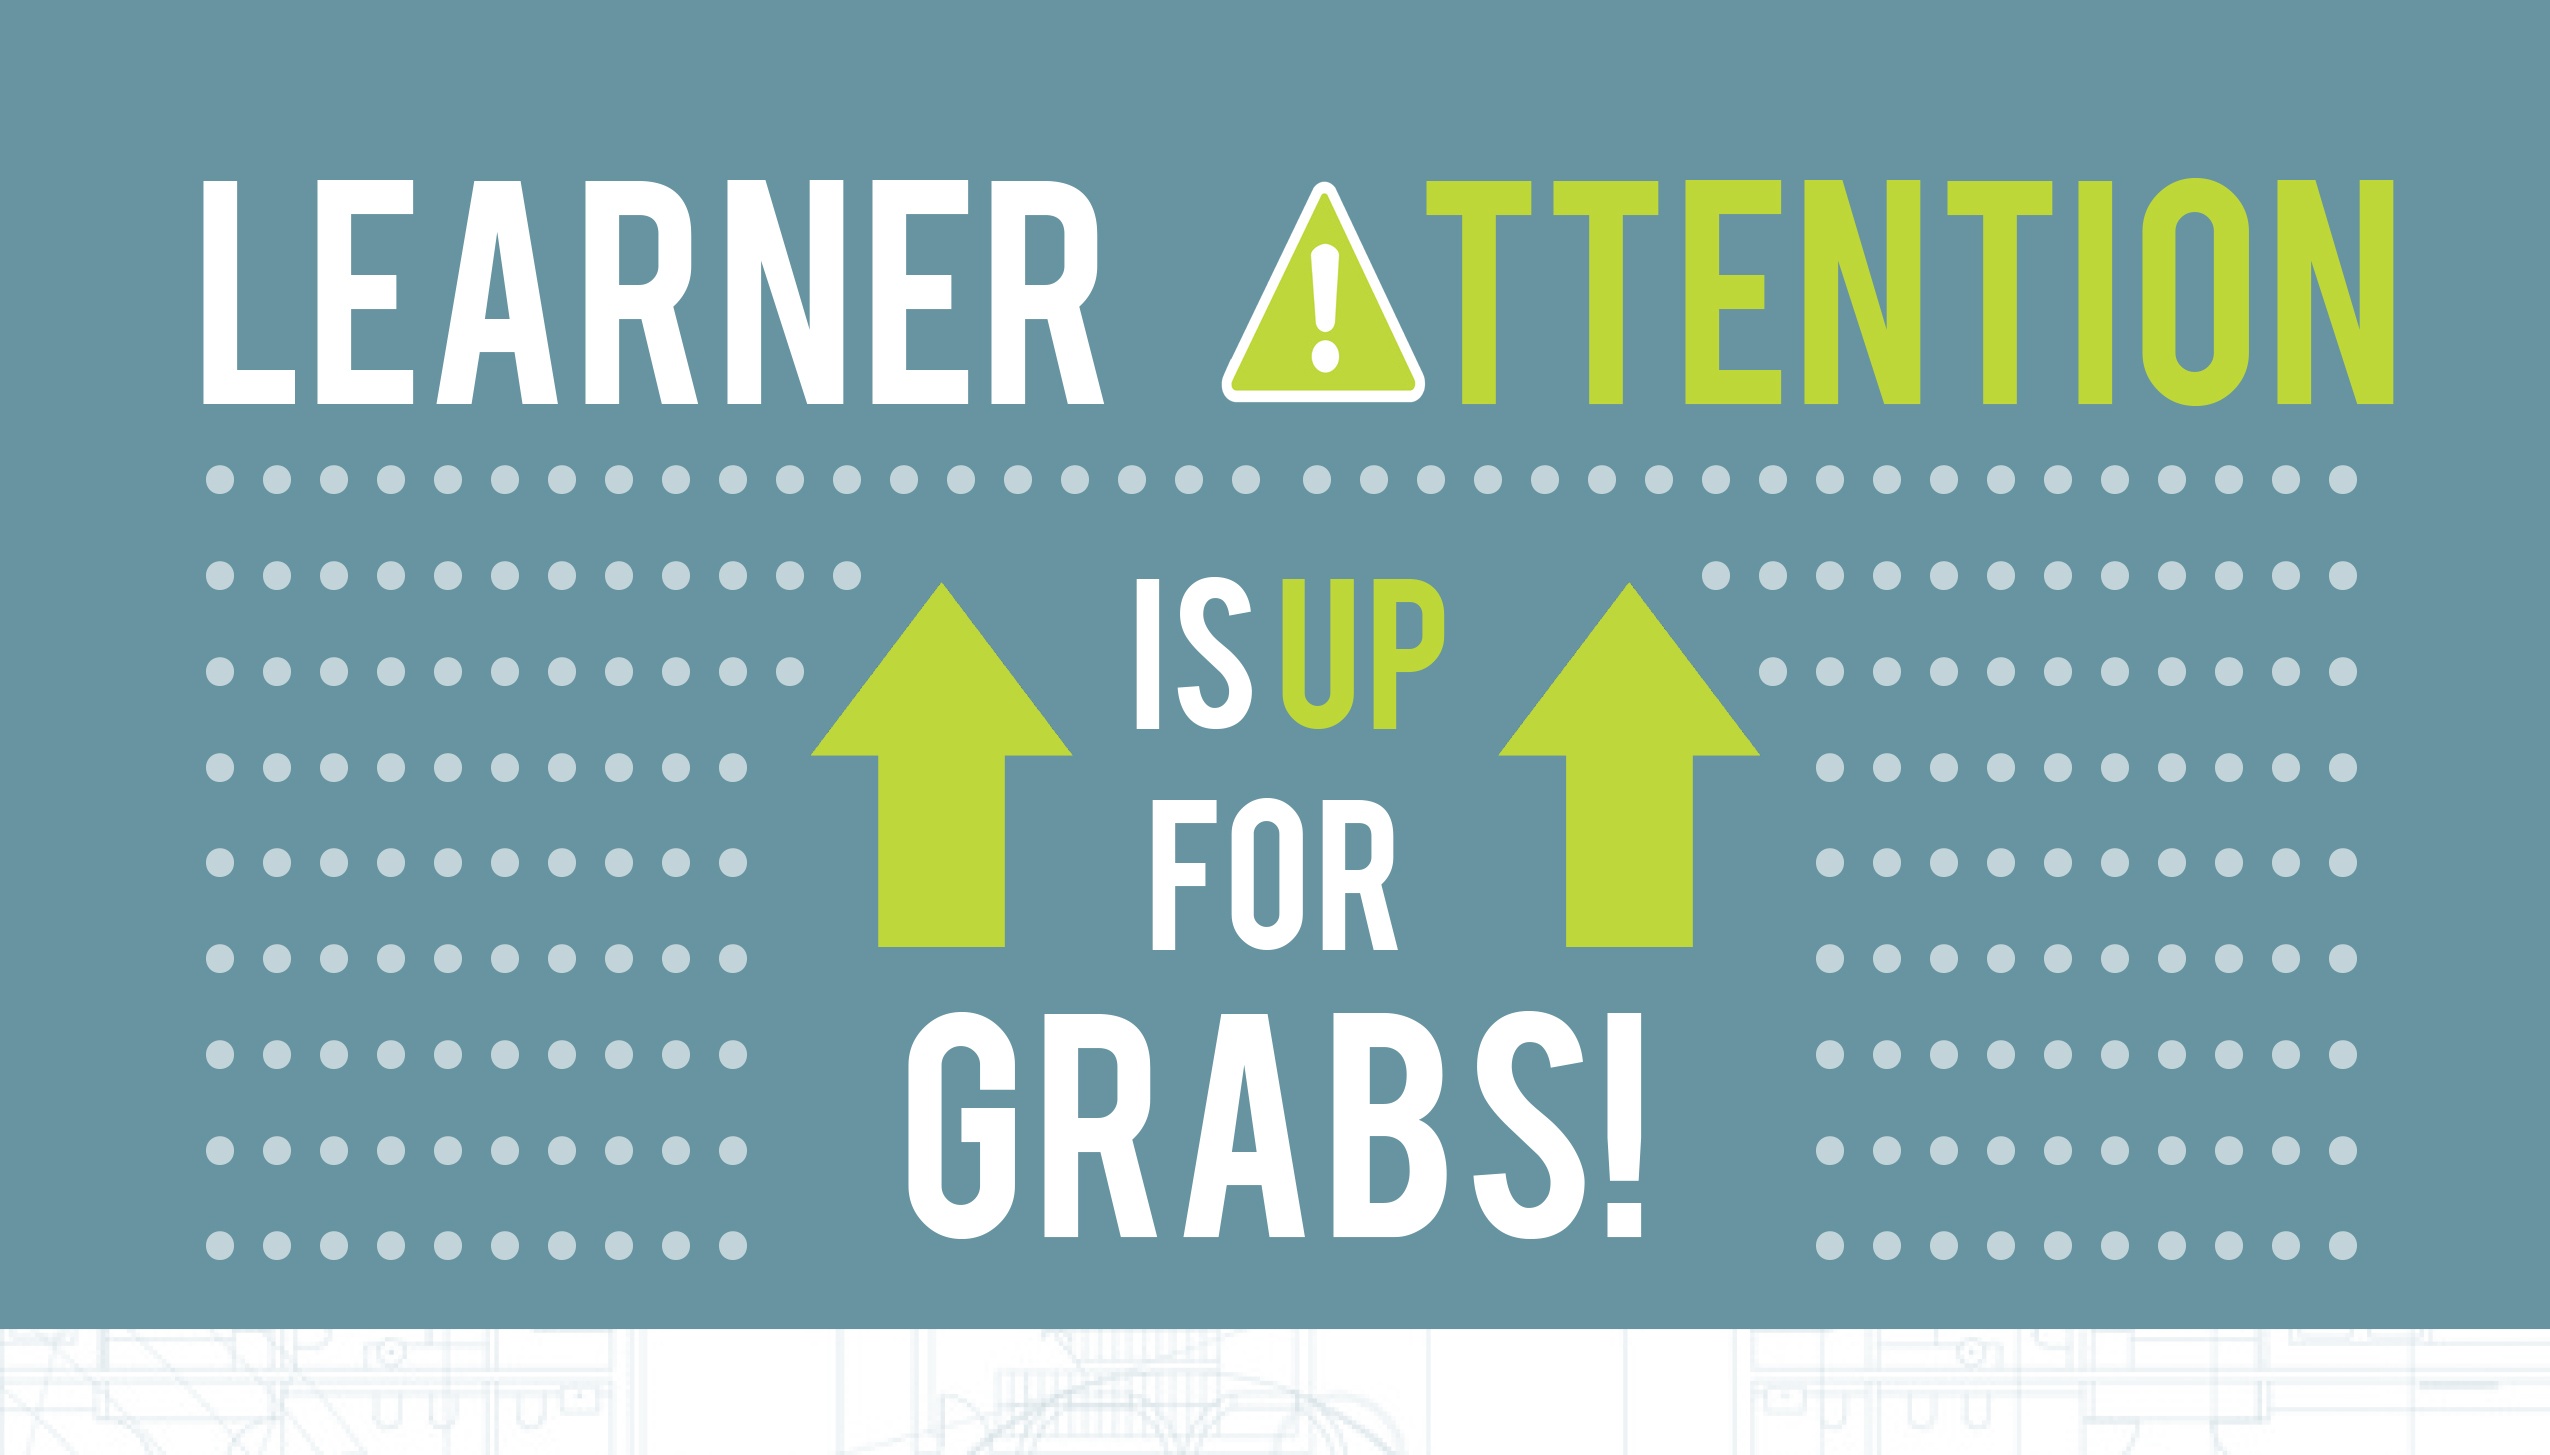 Infographic - Learner Attention Is up for Grabs